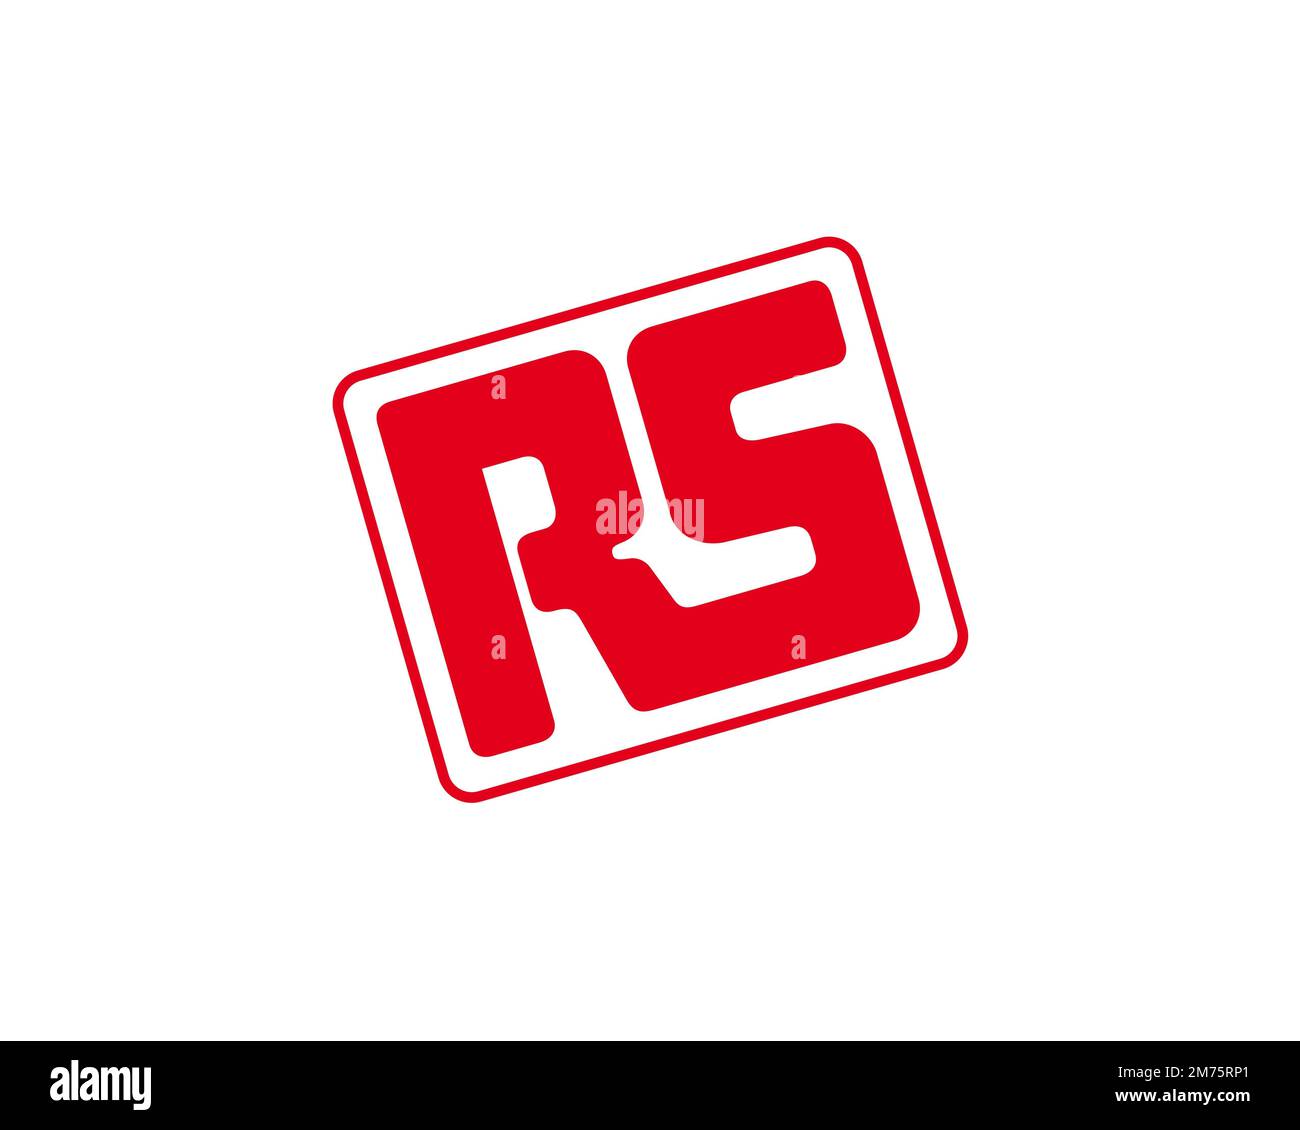 https://c8.alamy.com/comp/2M75RP1/rs-components-rotated-logo-white-background-2M75RP1.jpg